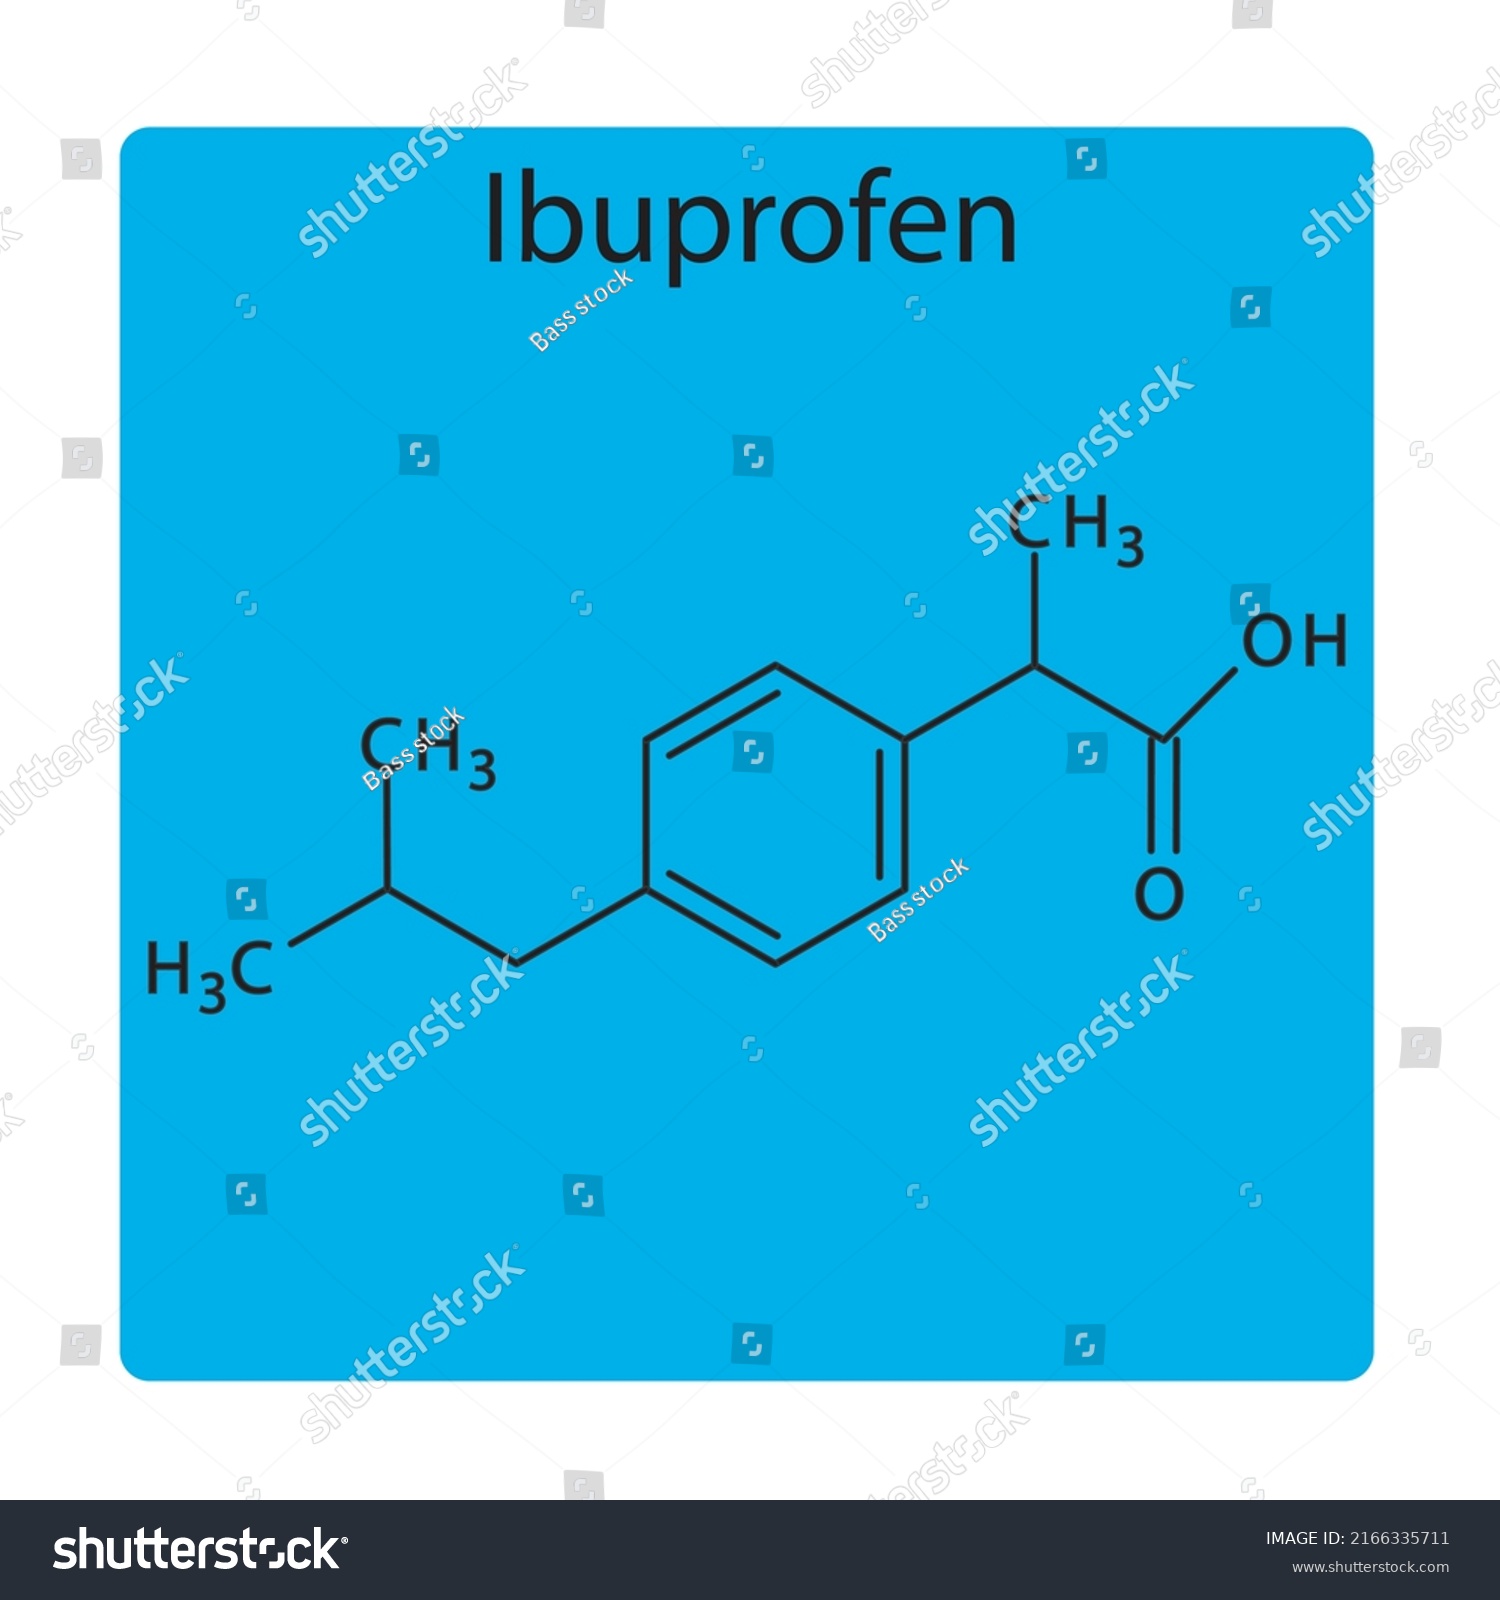 Ibuprofen Molecular Structure Flat Skeletal Chemical Stock Vector Royalty Free